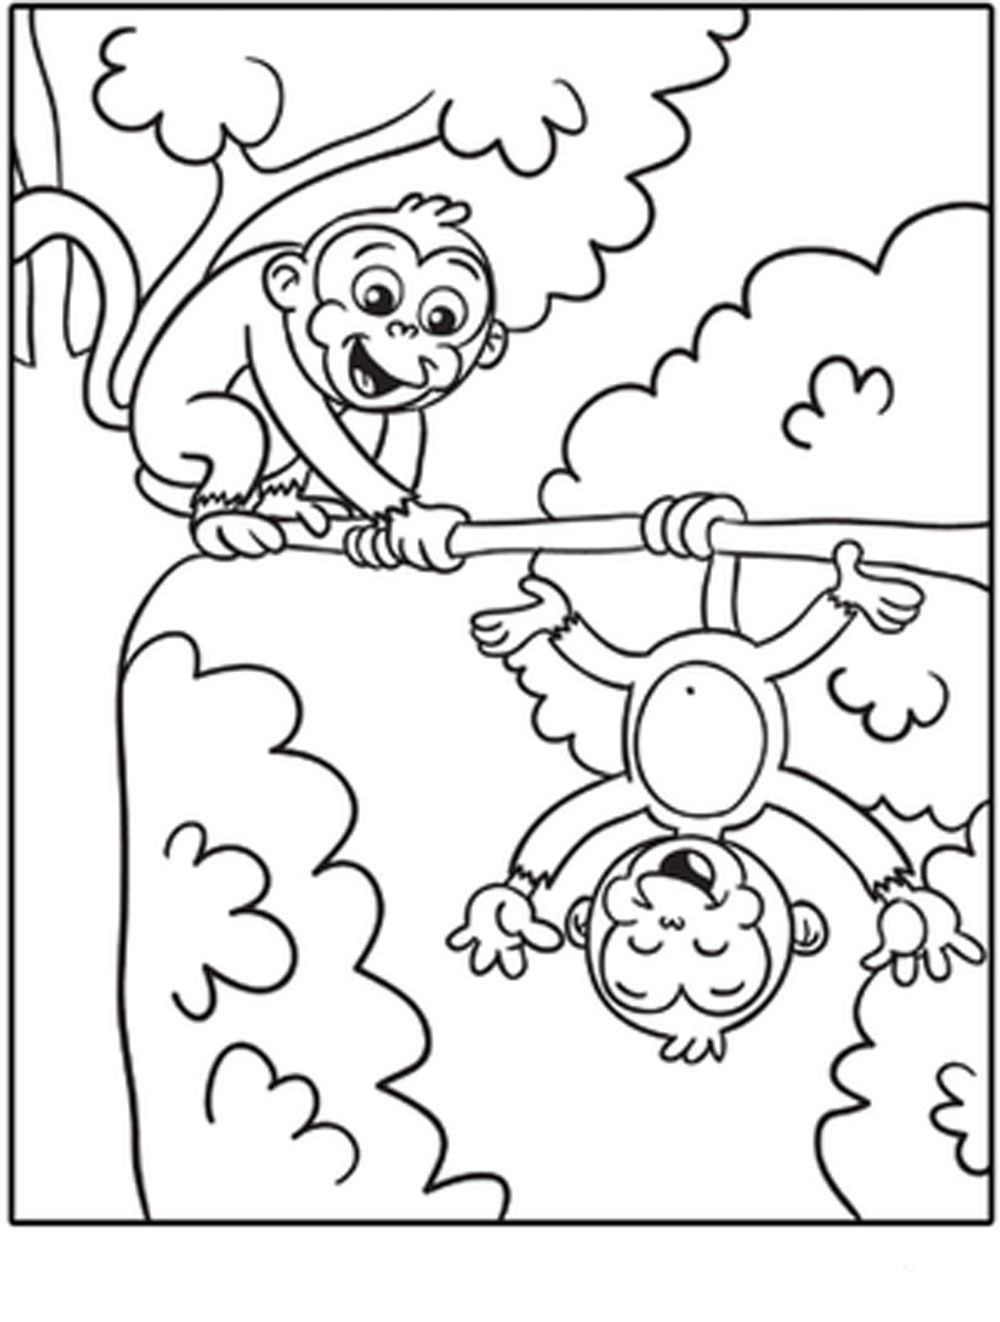 Coloring Book Pages Monkey
 free printable monkey coloring pages